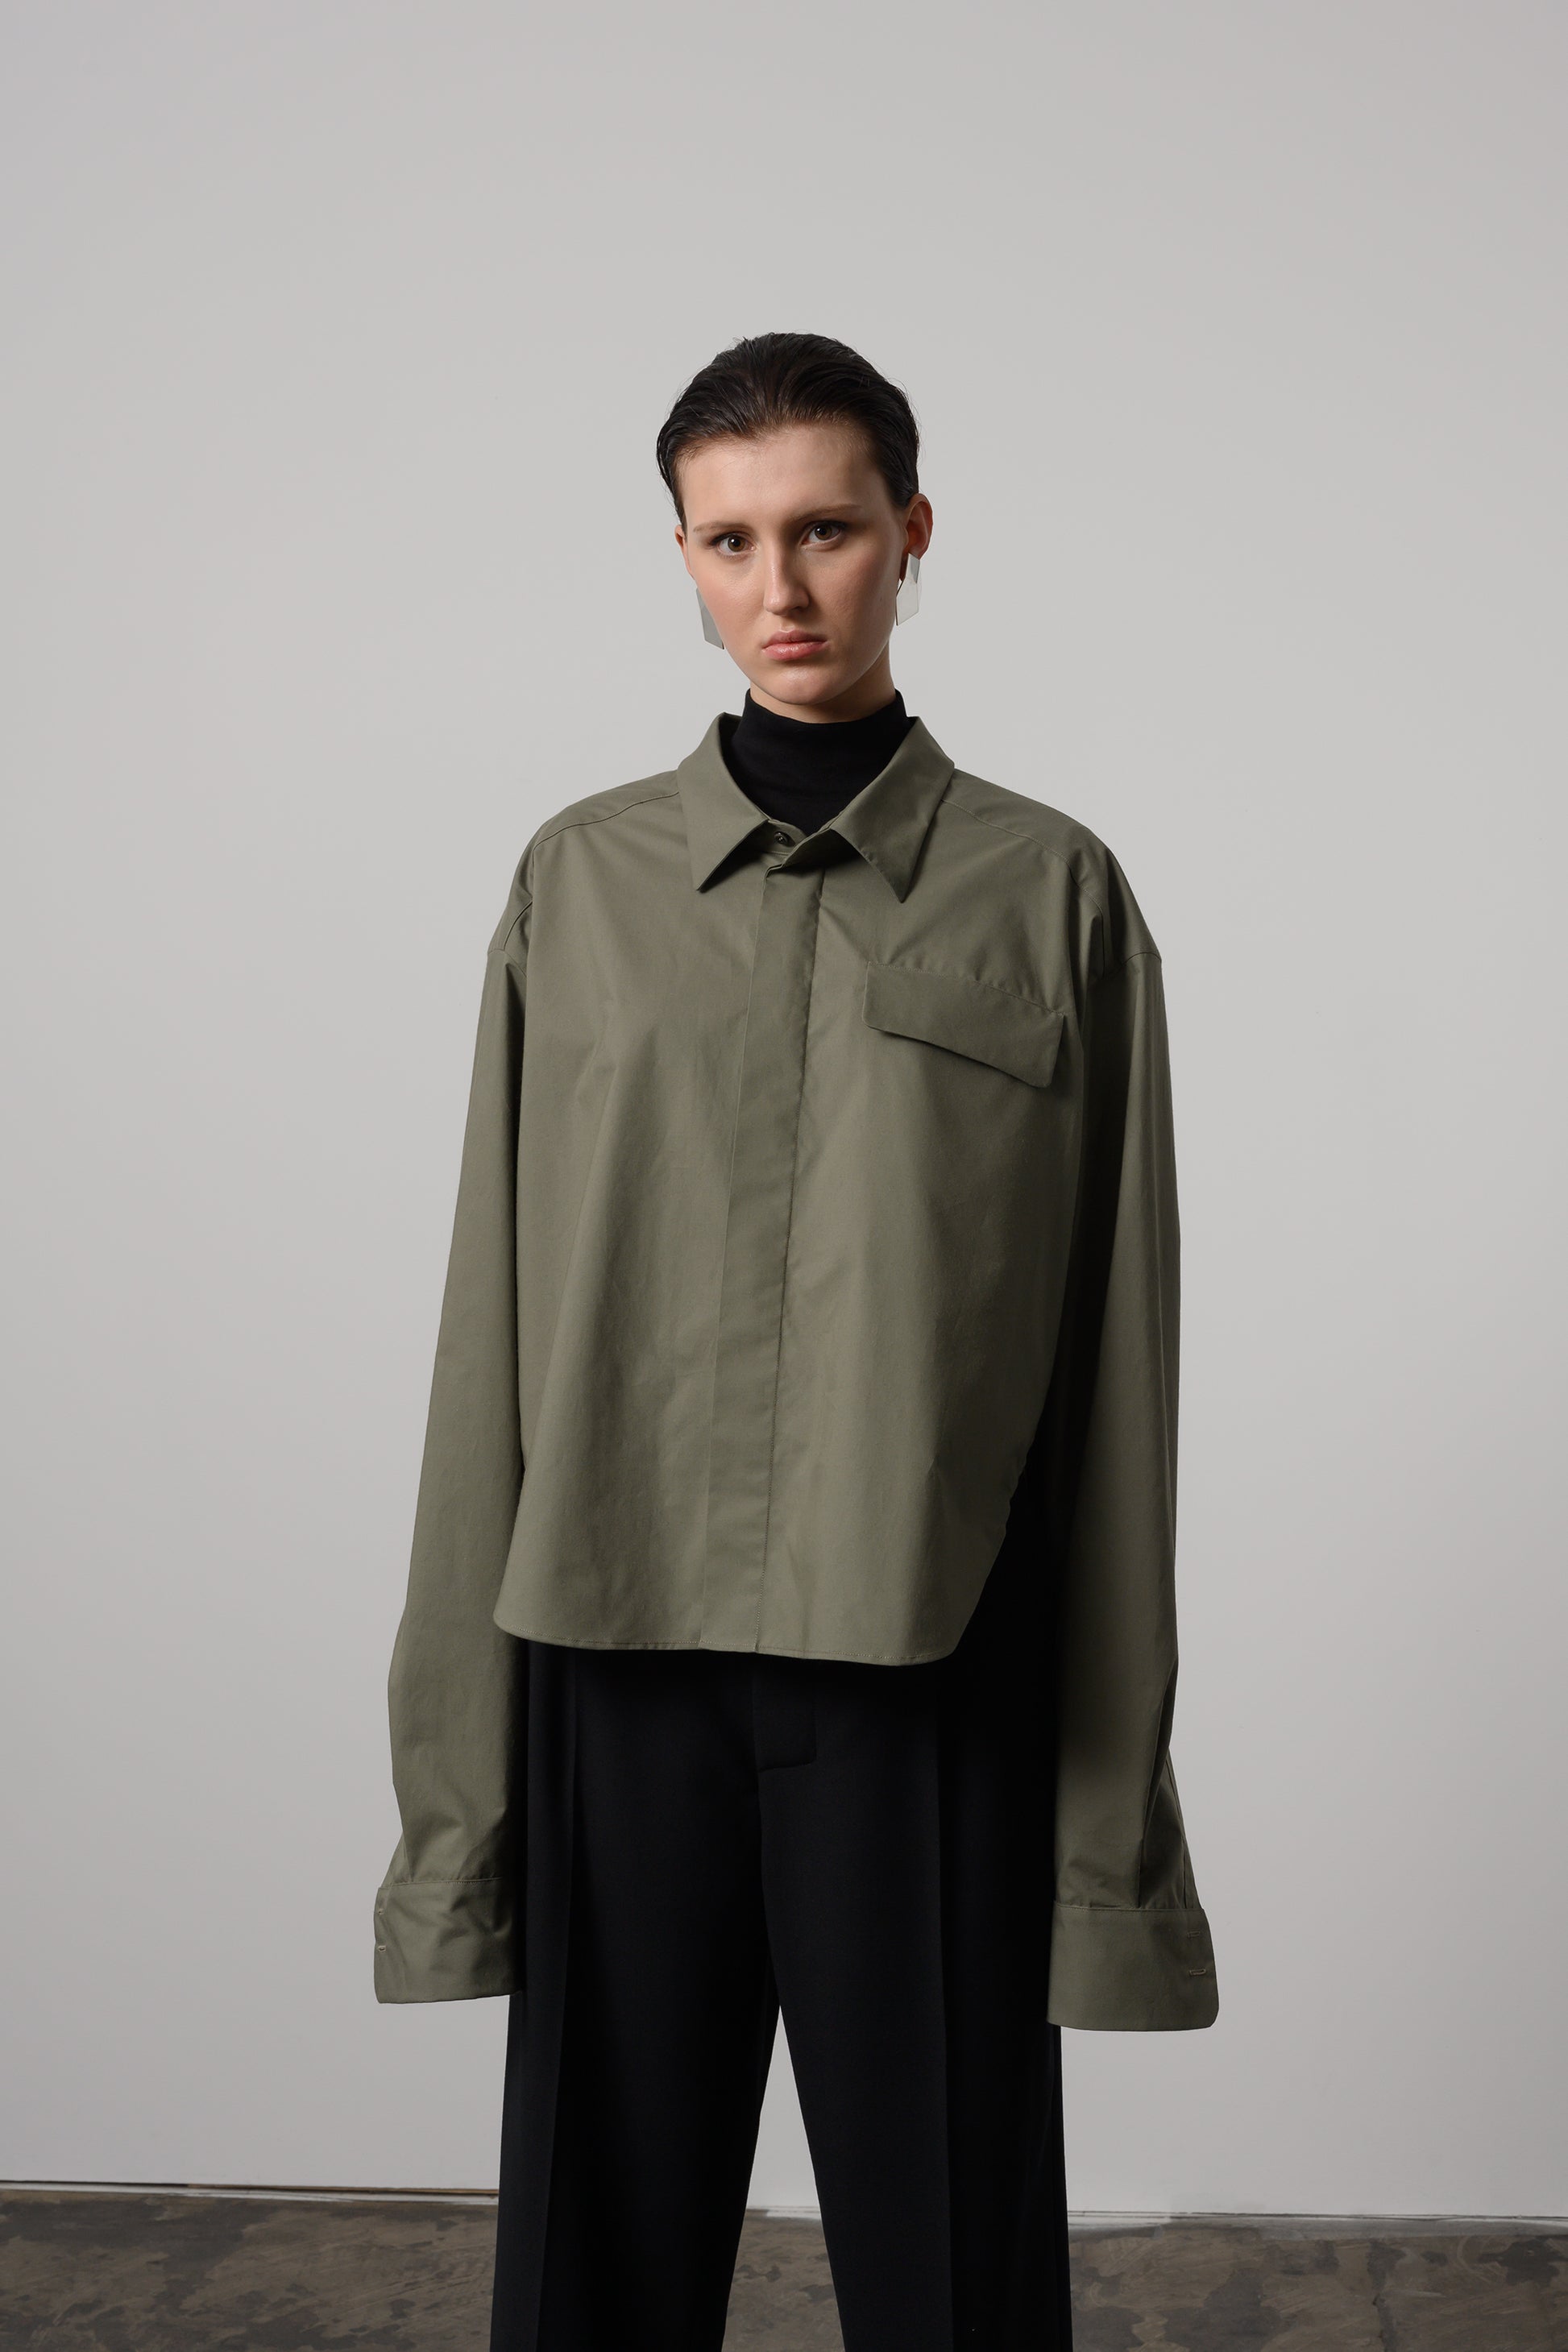 Model Zoe wearing olive green oversized shirt with classic collar and hidden button placket, made from FSC-certified cotton, styled for a casual to semi-formal look.